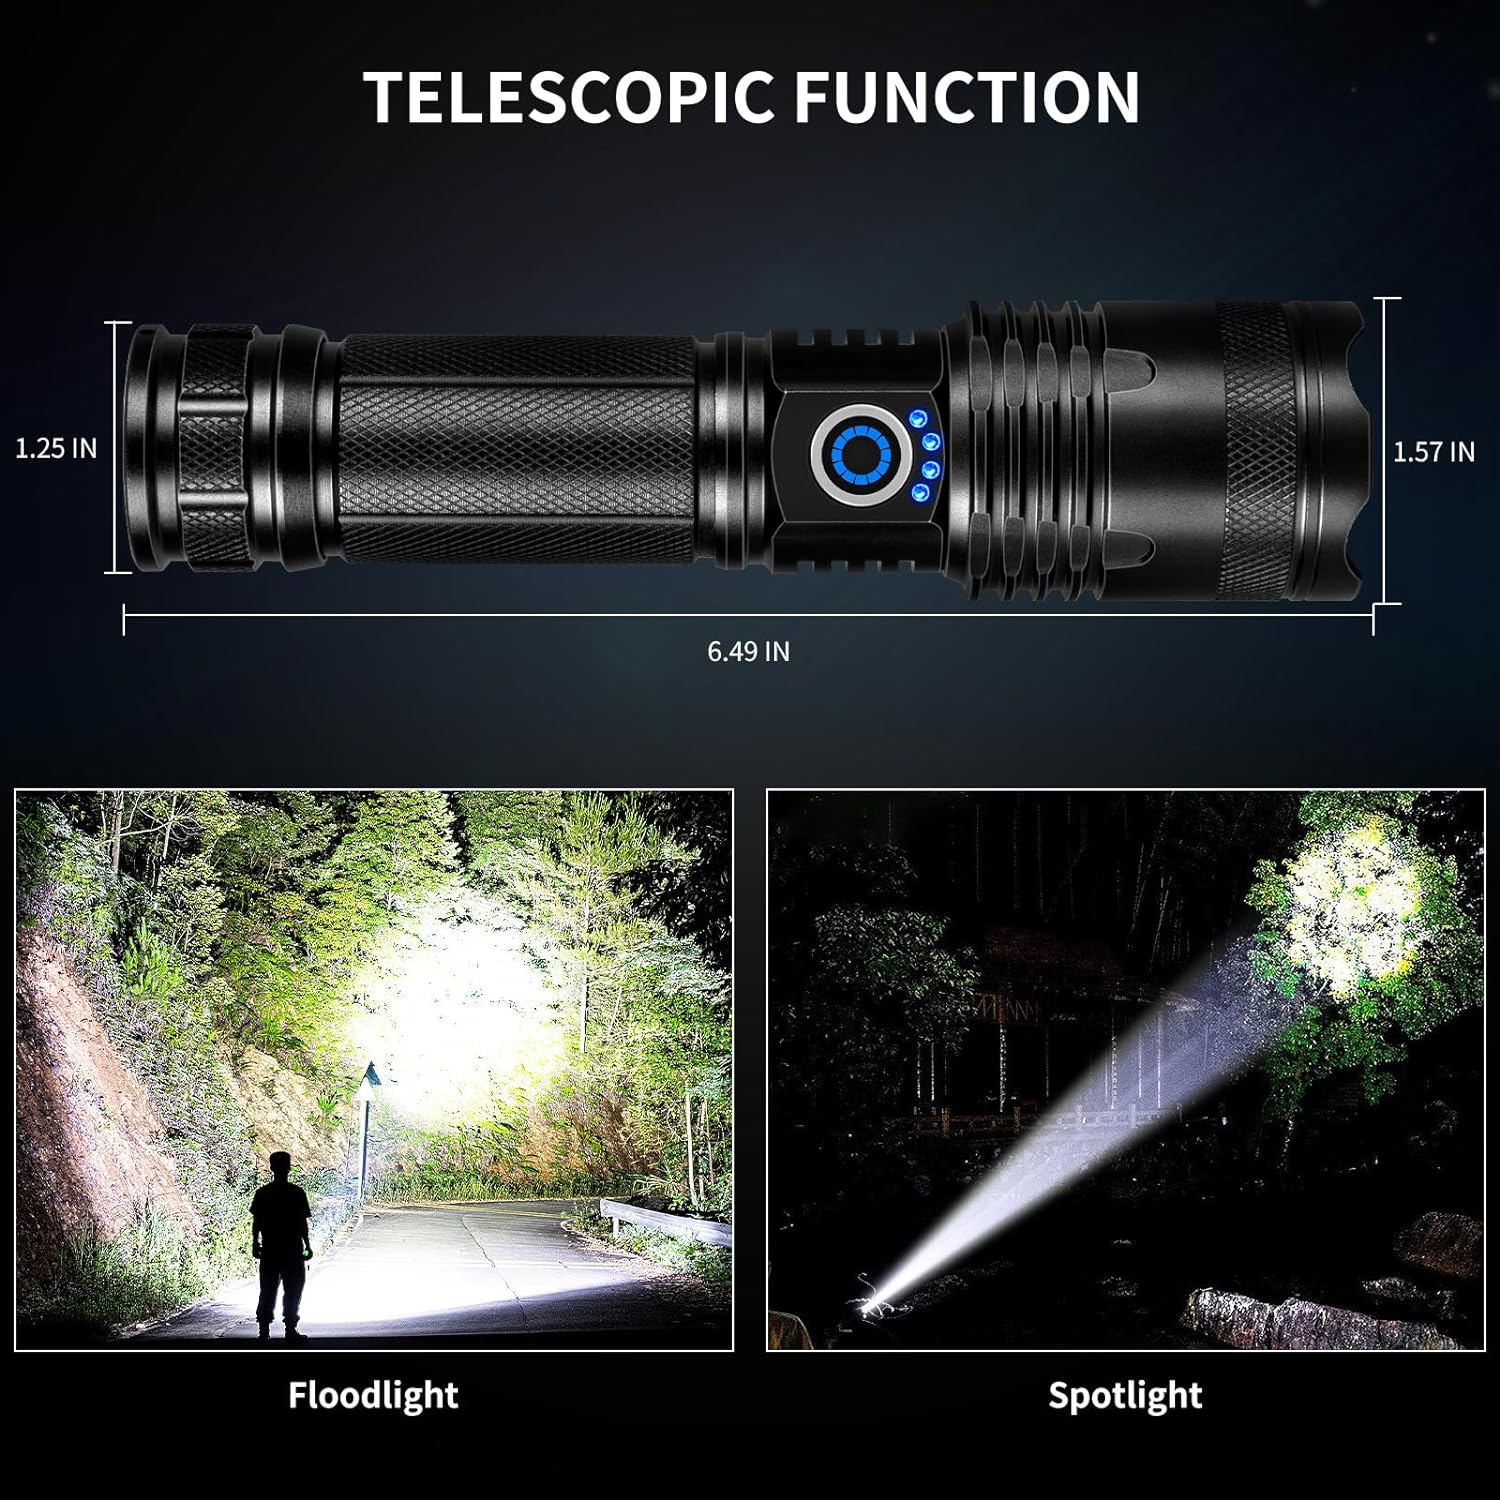 Led Flashlights High Lumens, 200000 Lumens Super Bright Rechargeable Flashlight with 5 Modes